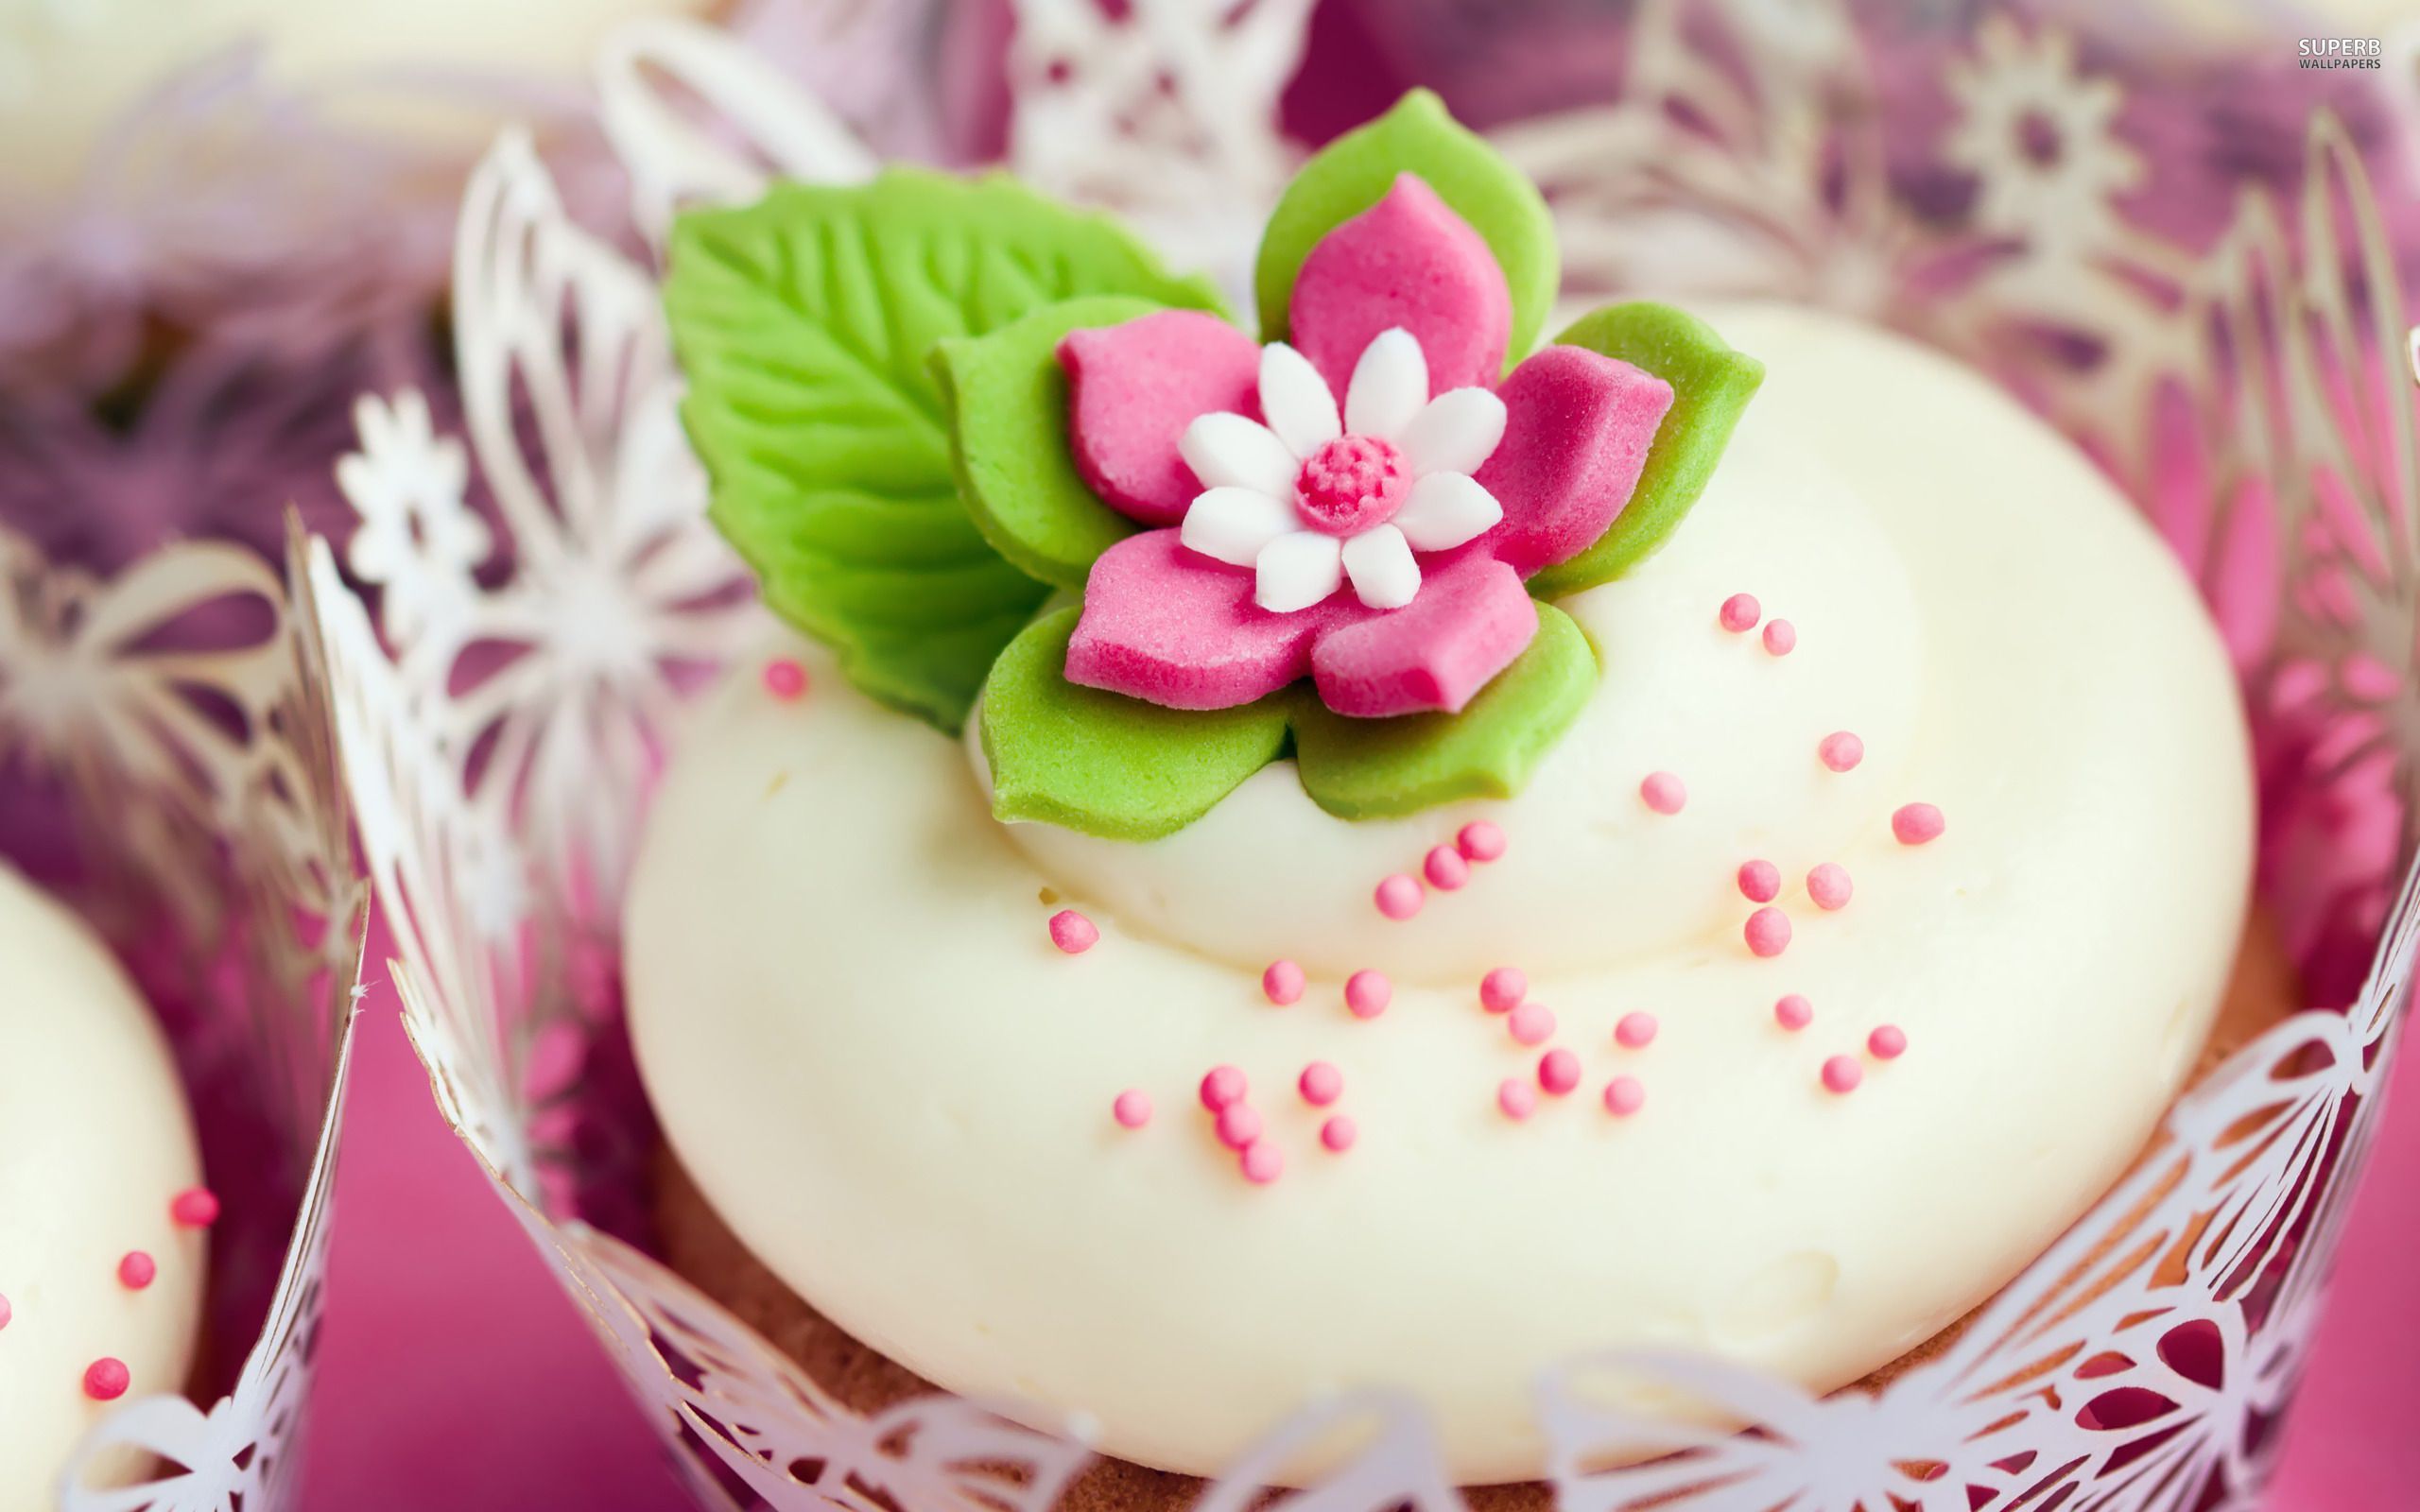 Cupcakes wallpaper - Photography wallpapers - #6623